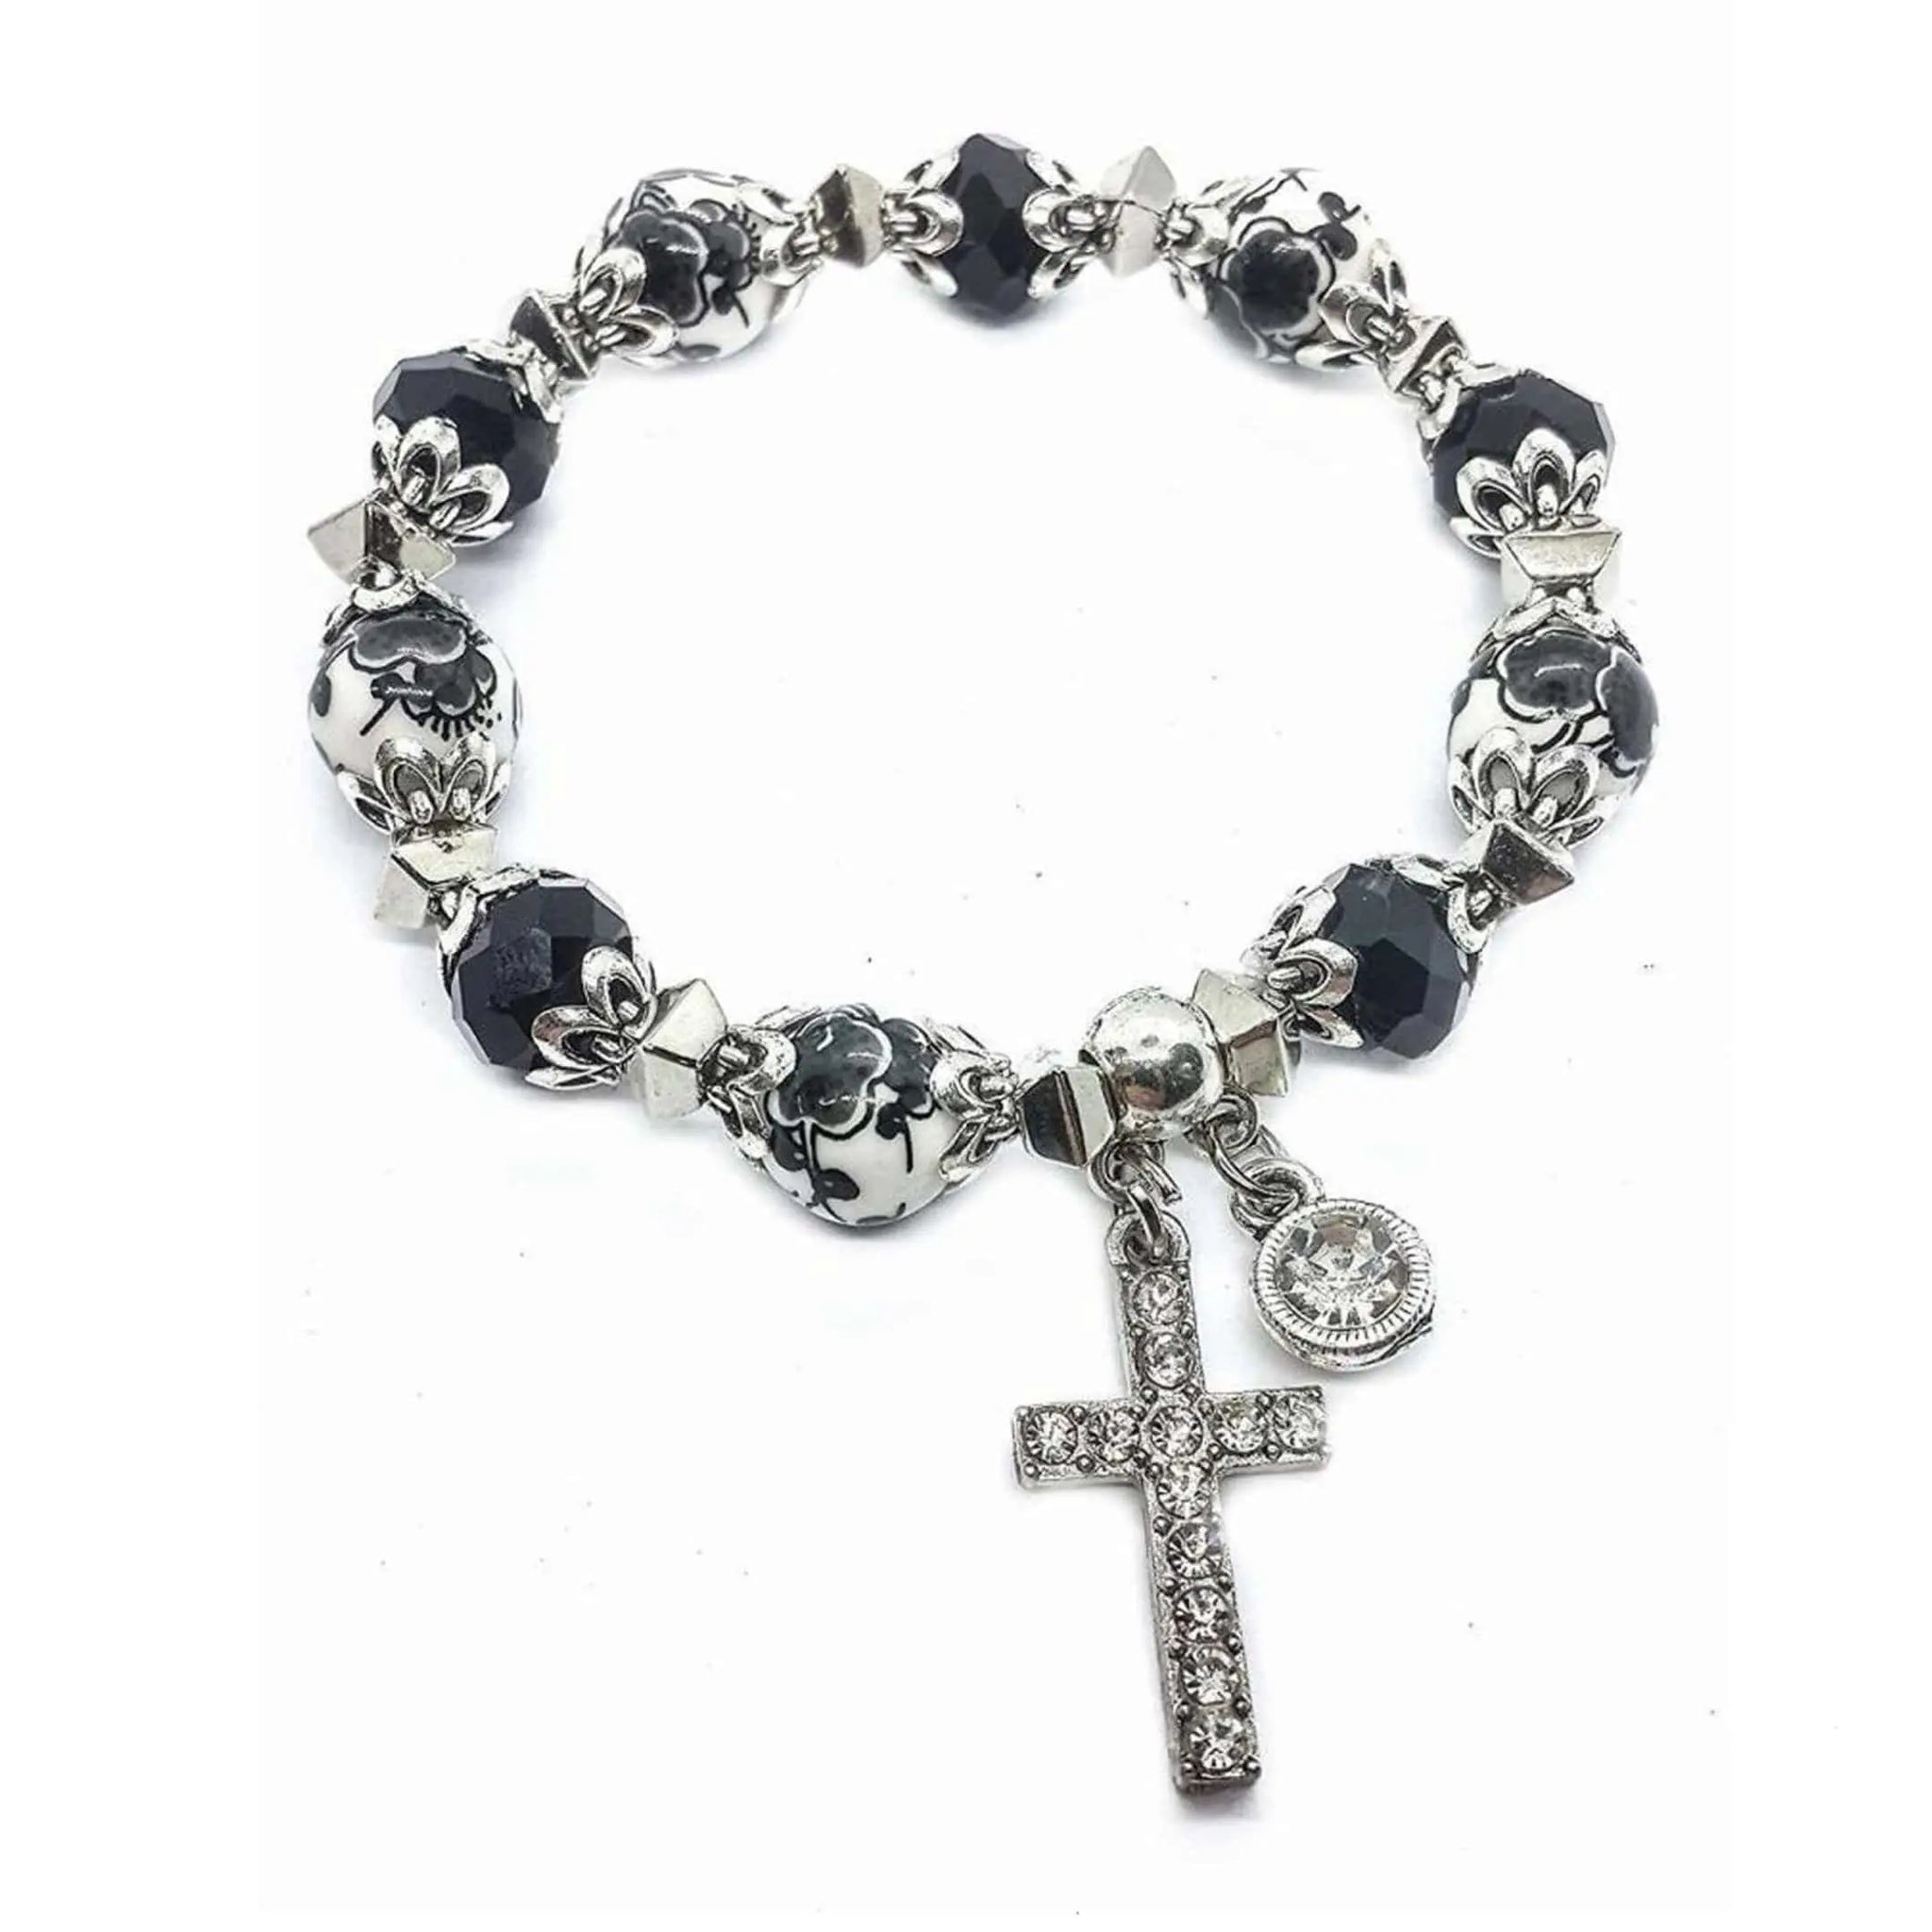 What is the Significance of Catholic Gifts Like Bracelets?